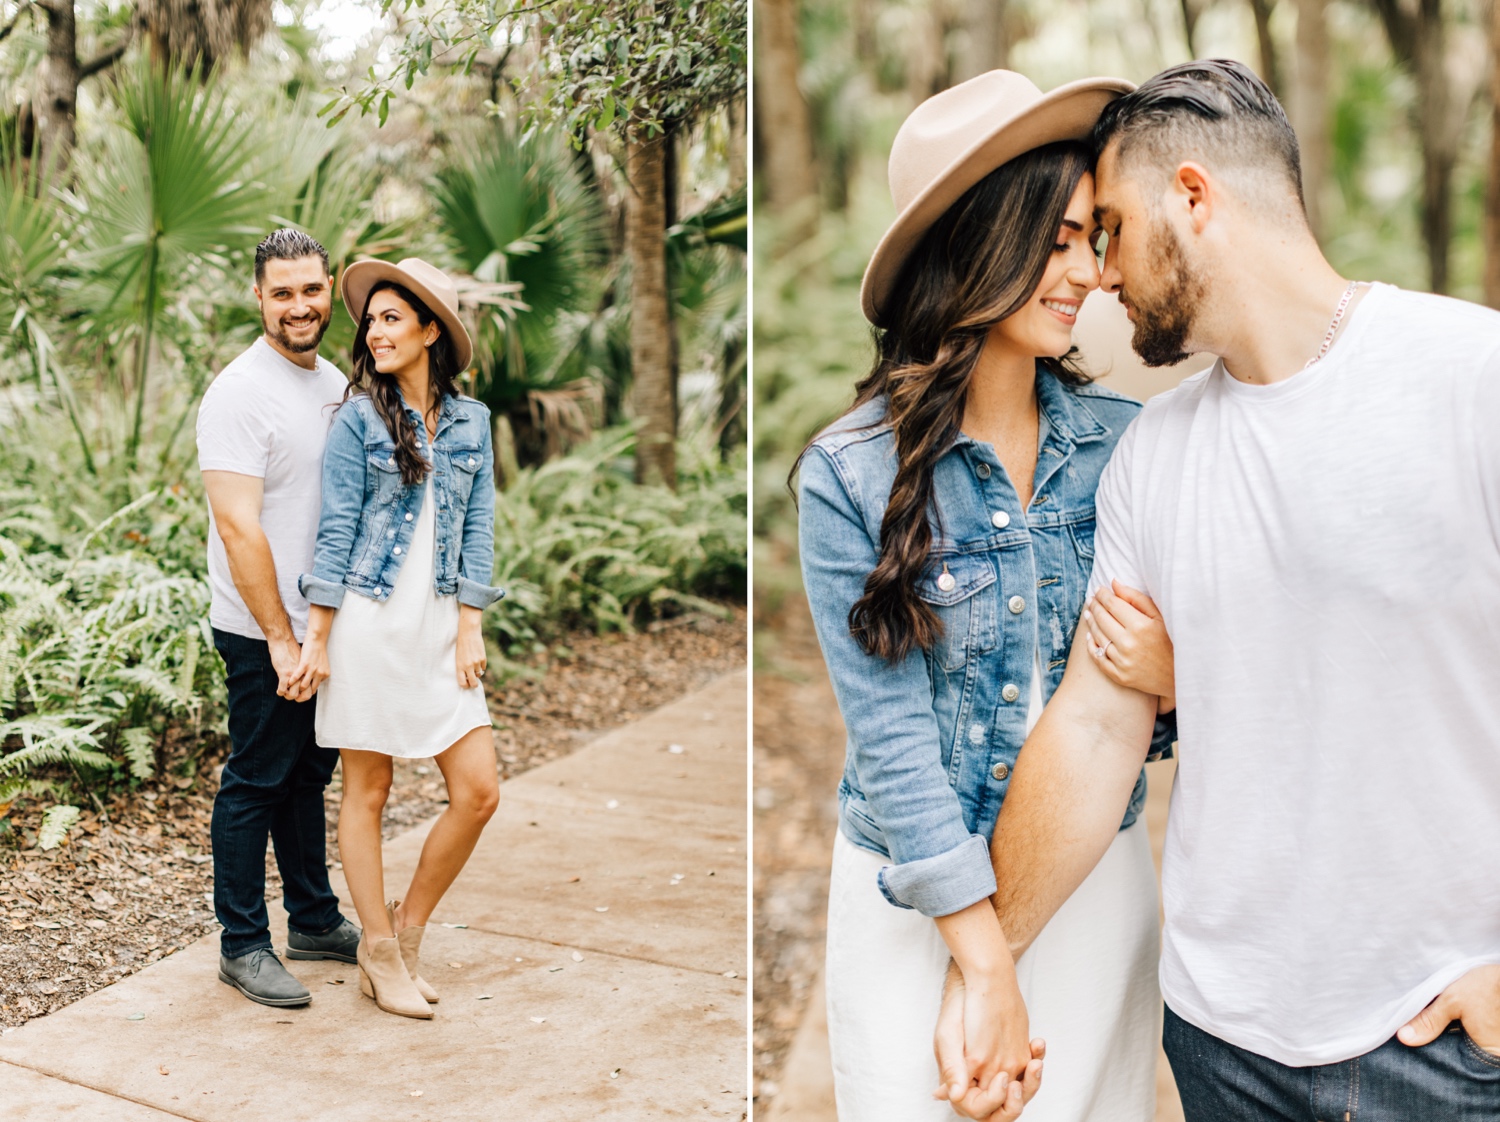 Delray Oaks Engagement Session Delray Beach Wedding Photographer Finding Light Photography